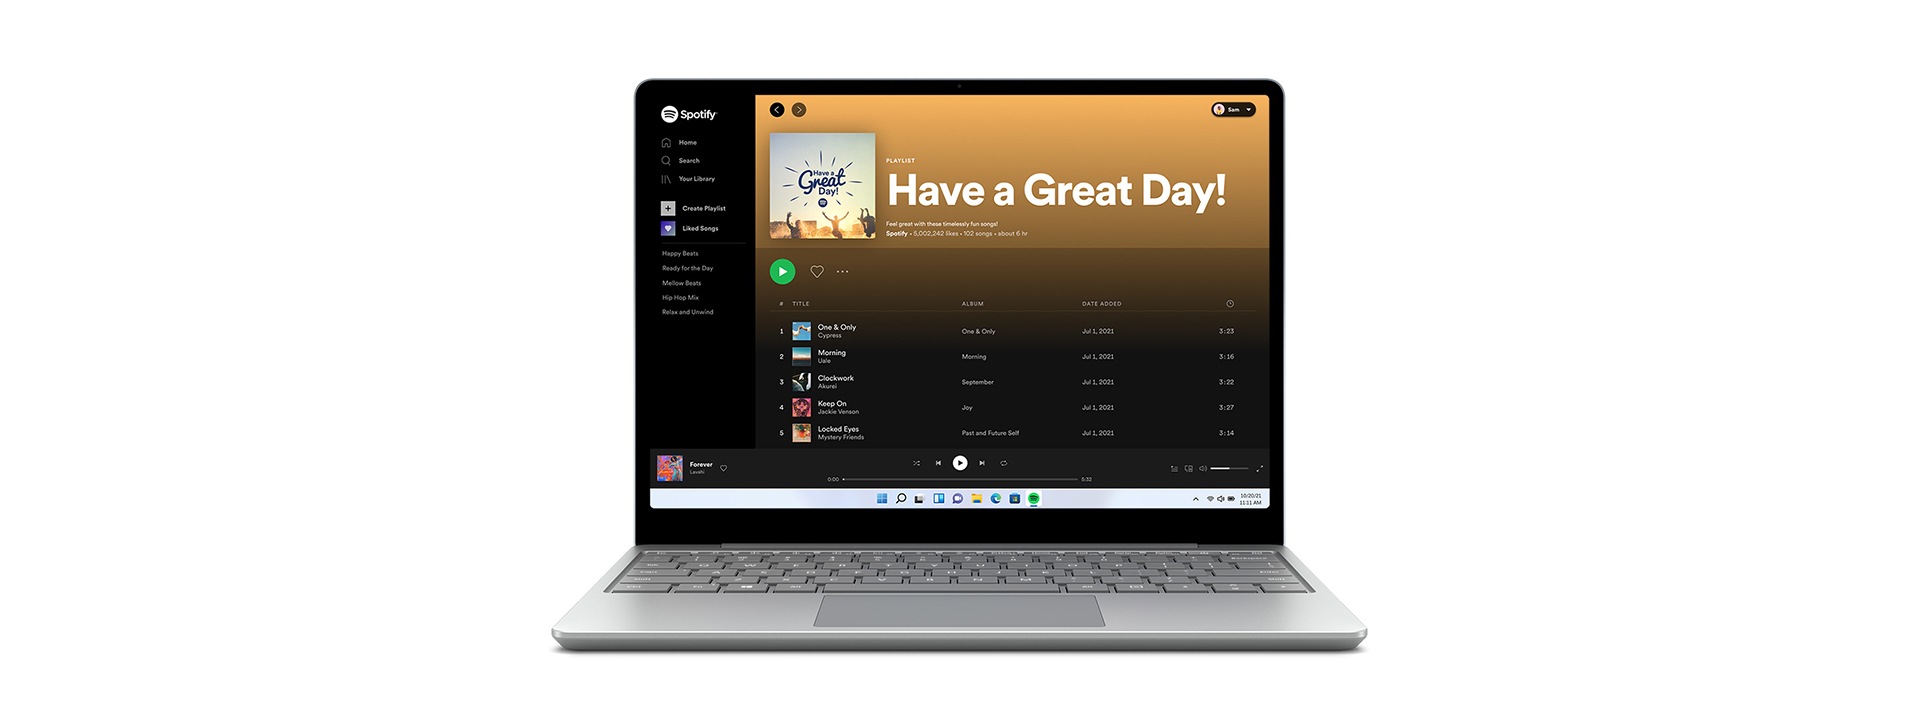 Surface Laptop Go 顯示 Spotify。